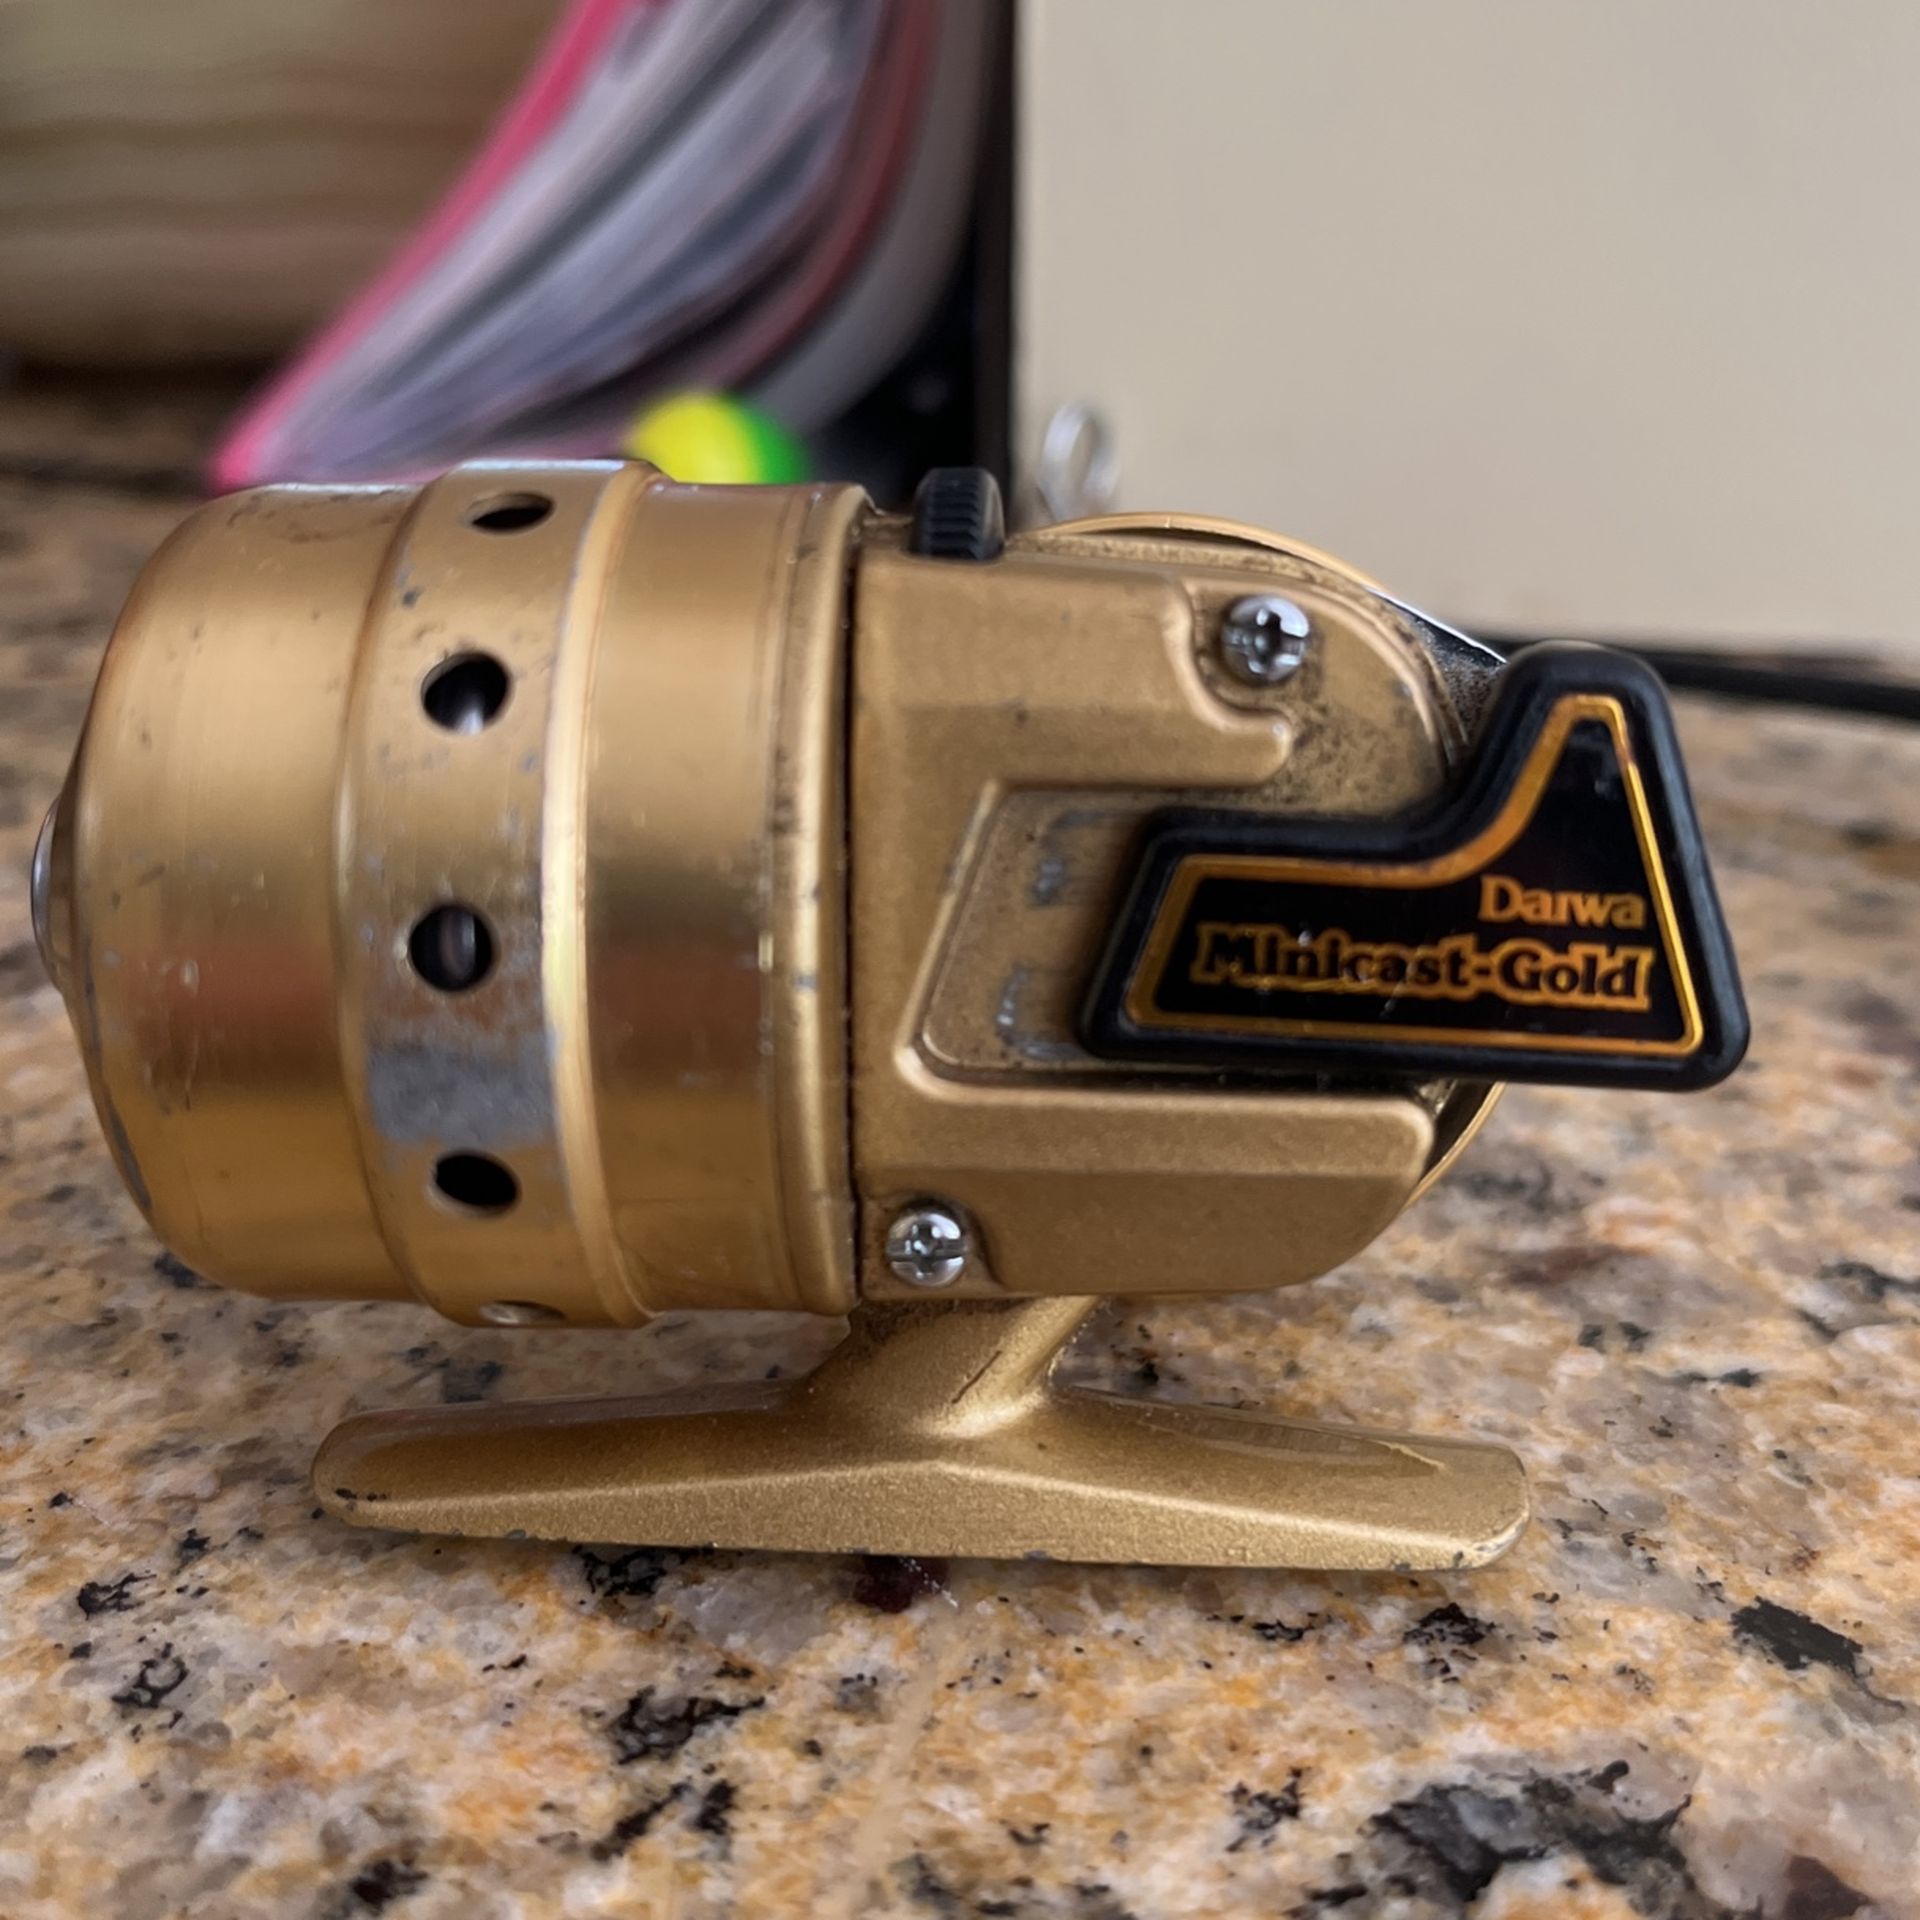 Vintage Daiwa Mini cast Gold Spin cast Reel for Sale in Milford, CT